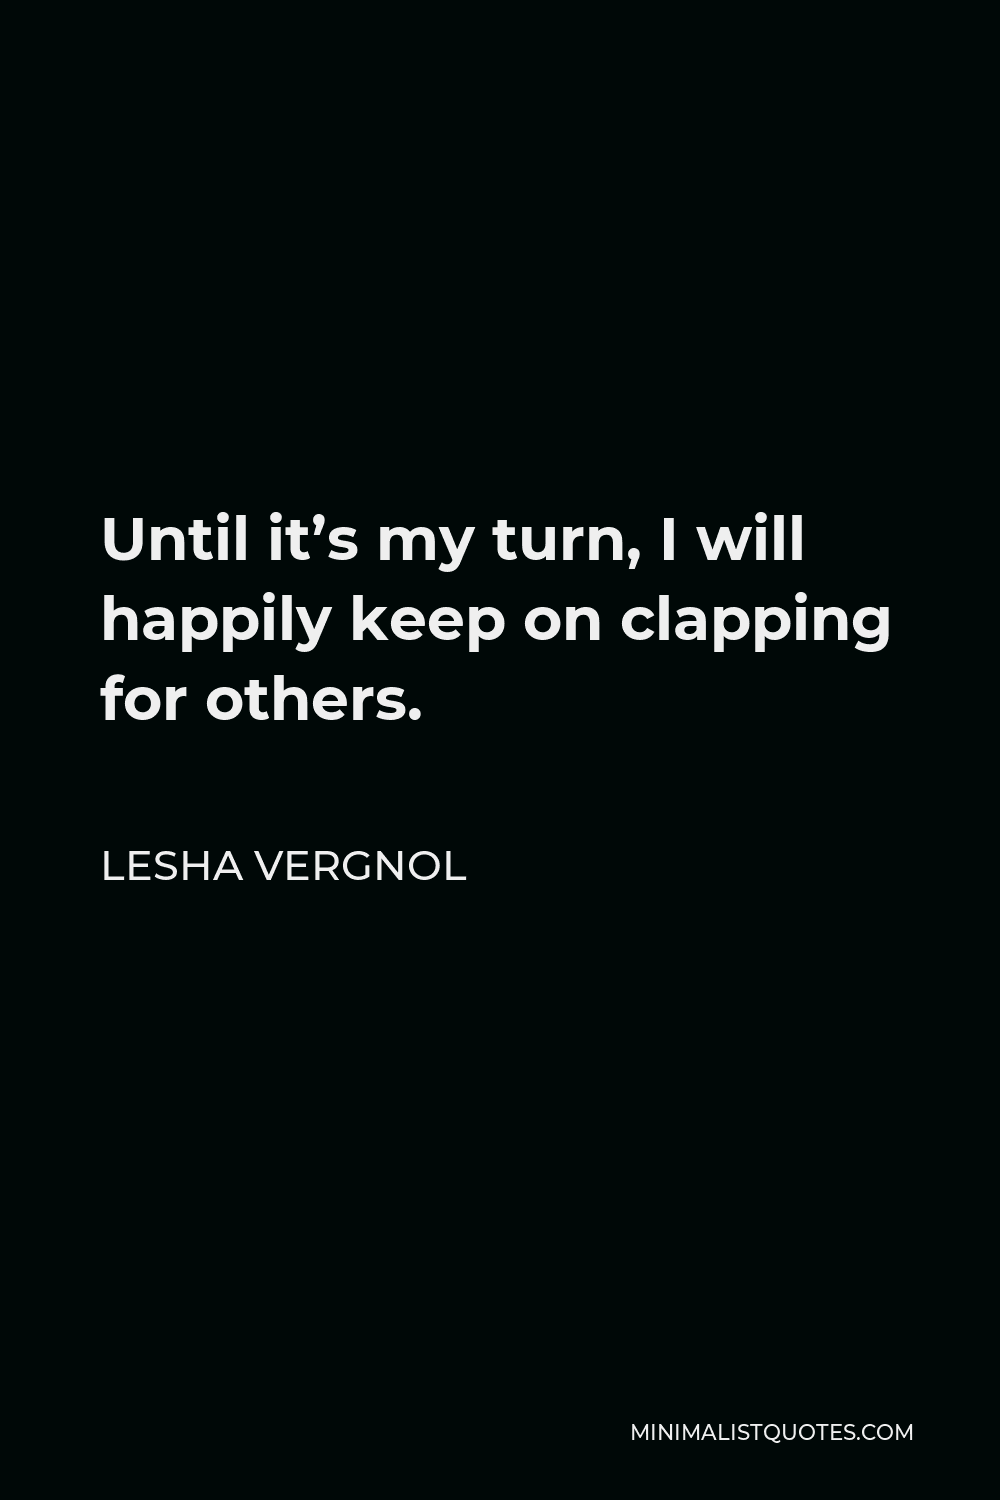 Lesha Vergnol Quote - Until it’s my turn, I will happily keep on clapping for others.